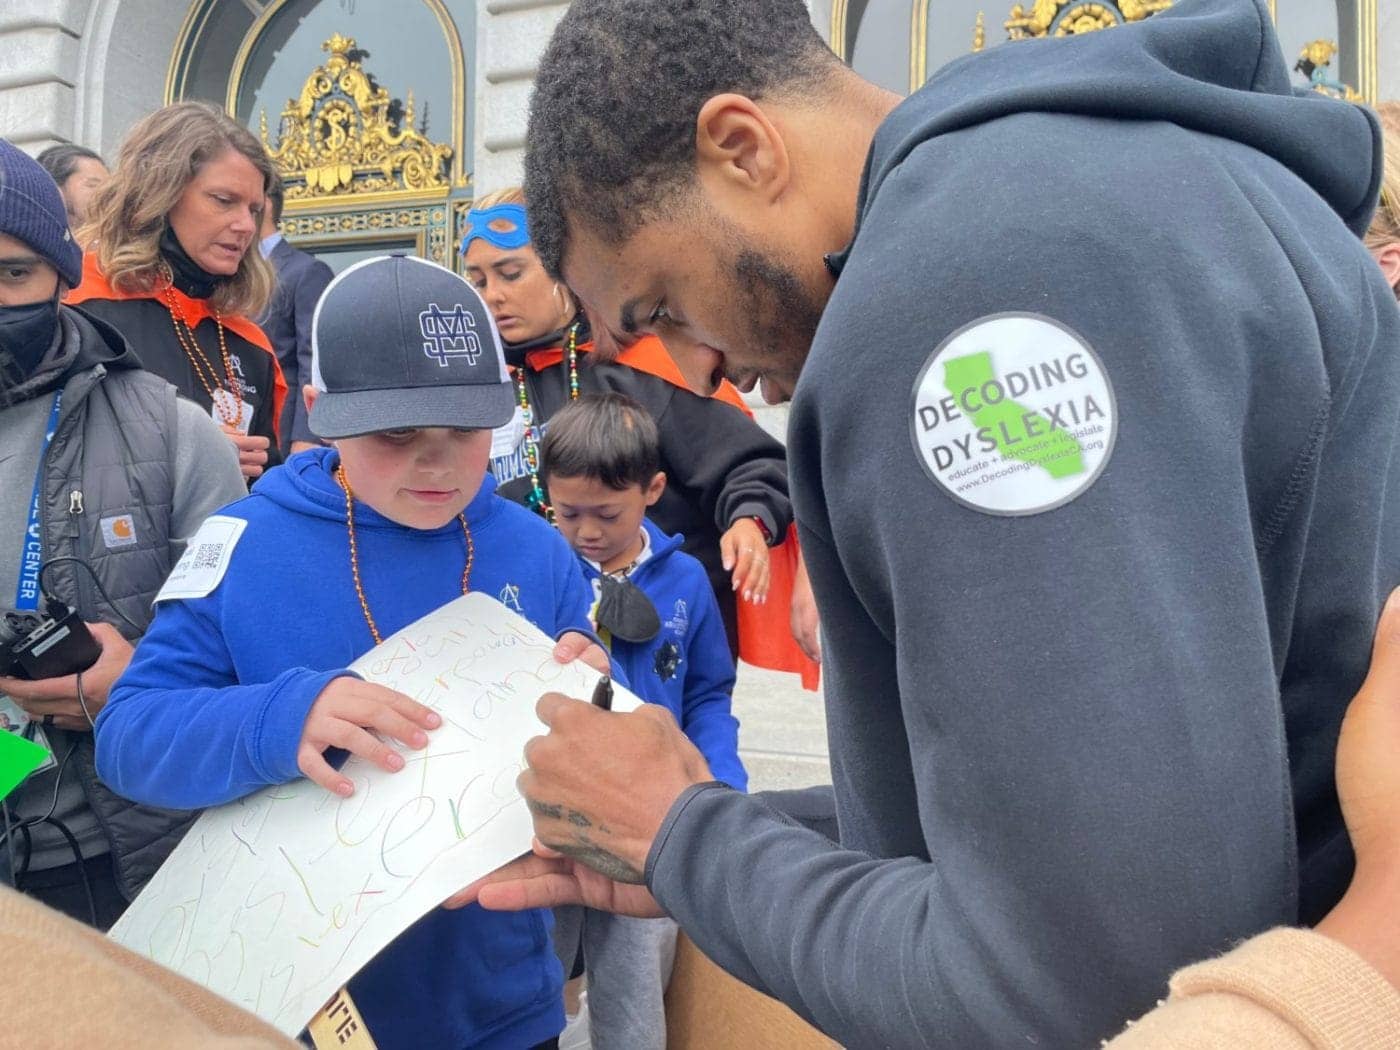 Golden-State-Warriors-guard-Gary-Payton-II-signing-at-Decoding-Dyslexia-CA-rally-in-San-Francisco-at-City-Hall-by-Daphne-Young-032922-1400x1050, Golden State Warriors guard rallies for dyslexia screenings, Culture Currents News & Views 